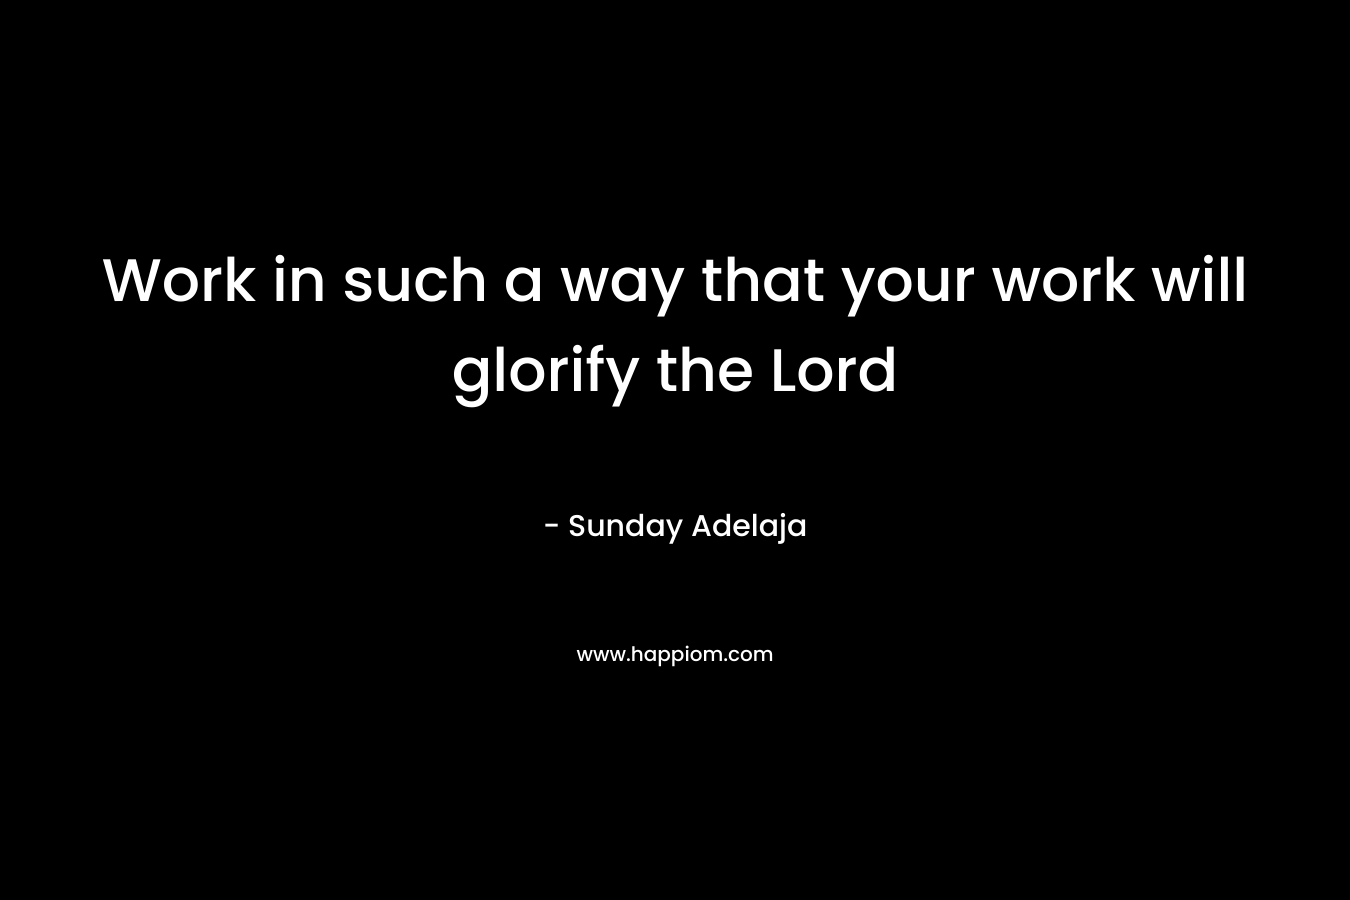 Work in such a way that your work will glorify the Lord